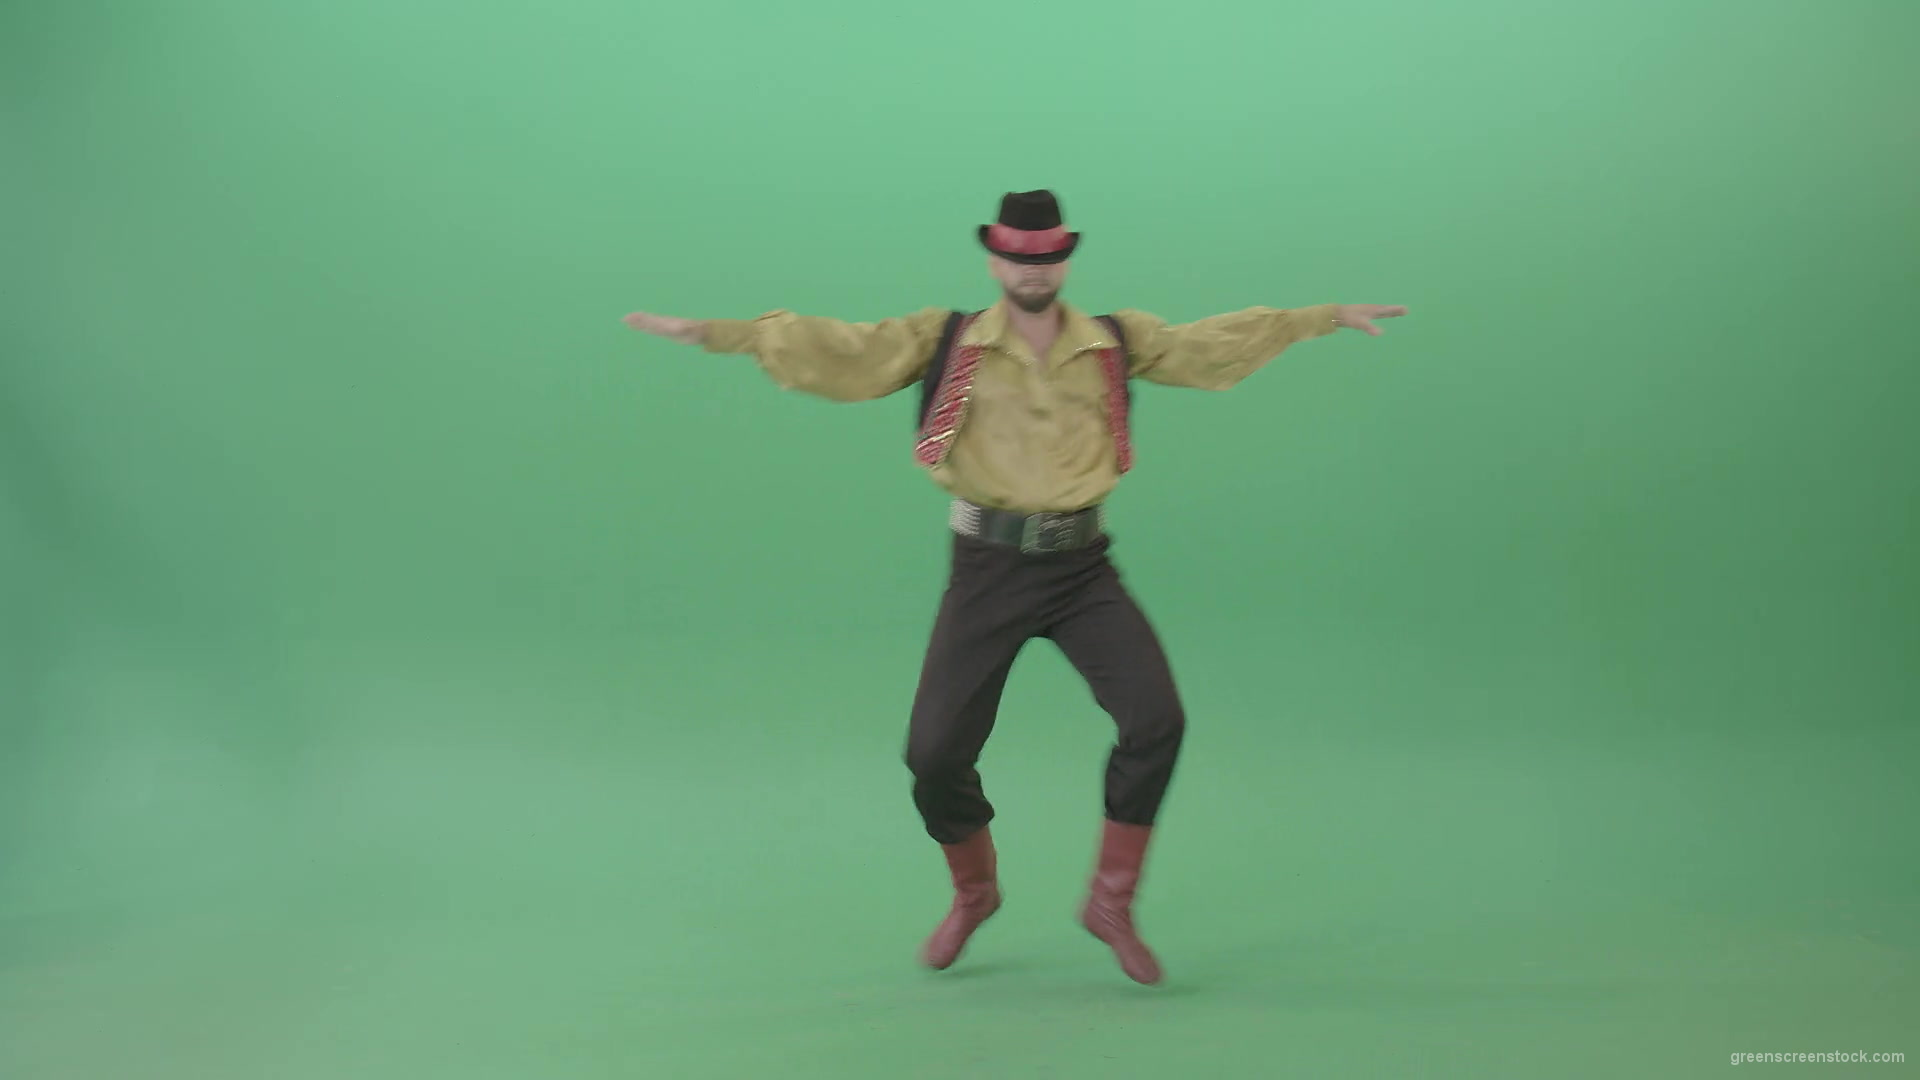 Balkan-Gipsy-Man-dancing-and-jump-isolated-on-green-screen-4K-30-fps-Video-Footage-1920_008 Green Screen Stock